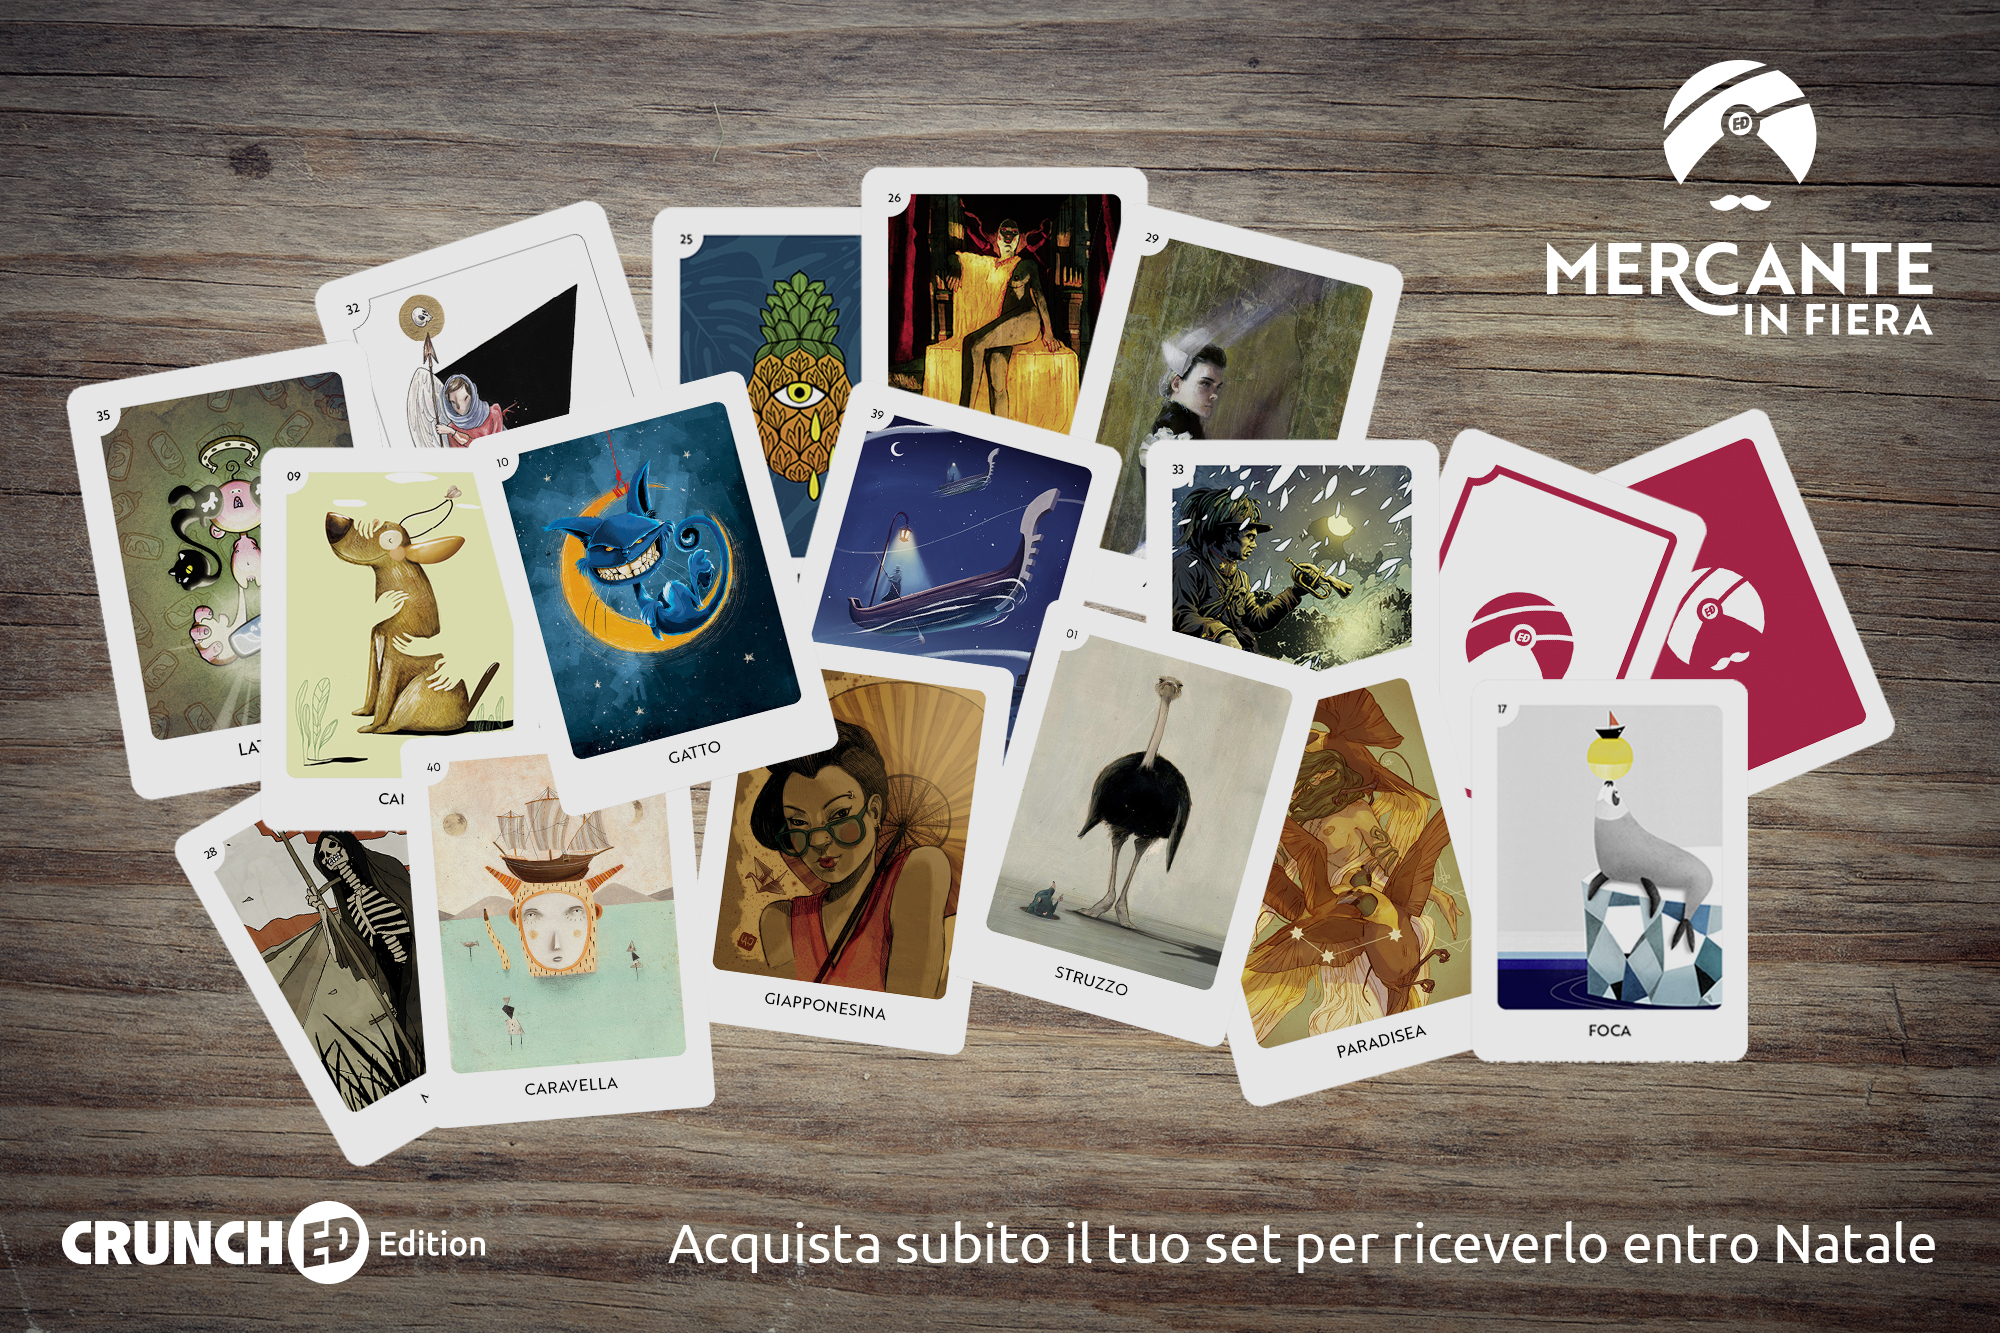 Mercante in Fiera” Crunched Edition - crowdfunding